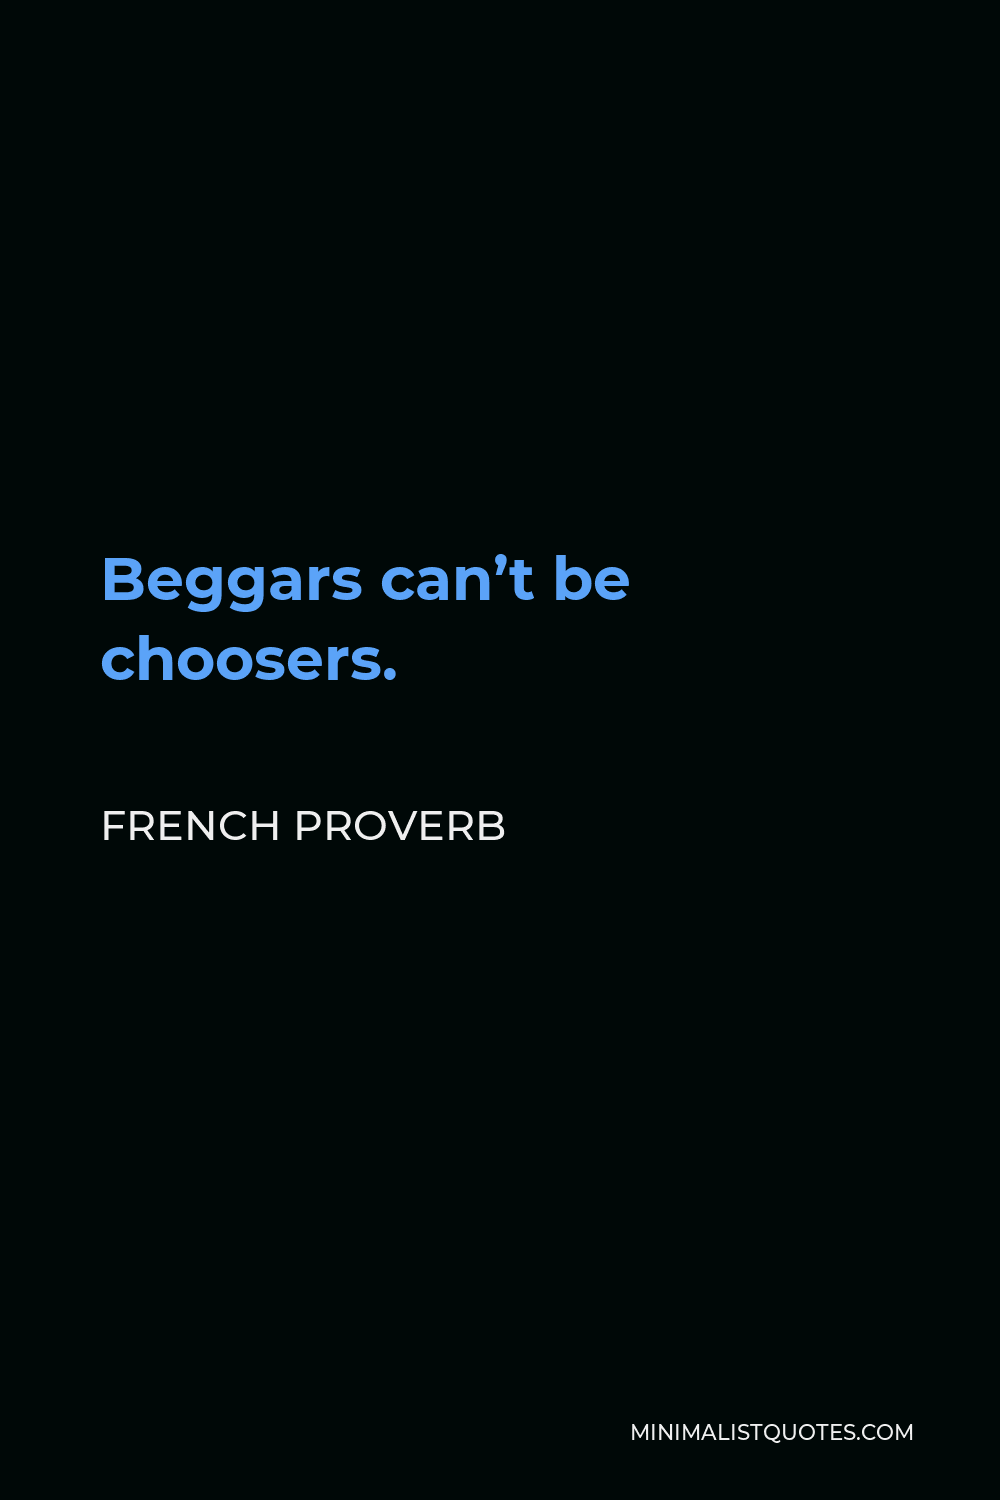 French Proverb Quote - Beggars can’t be choosers.